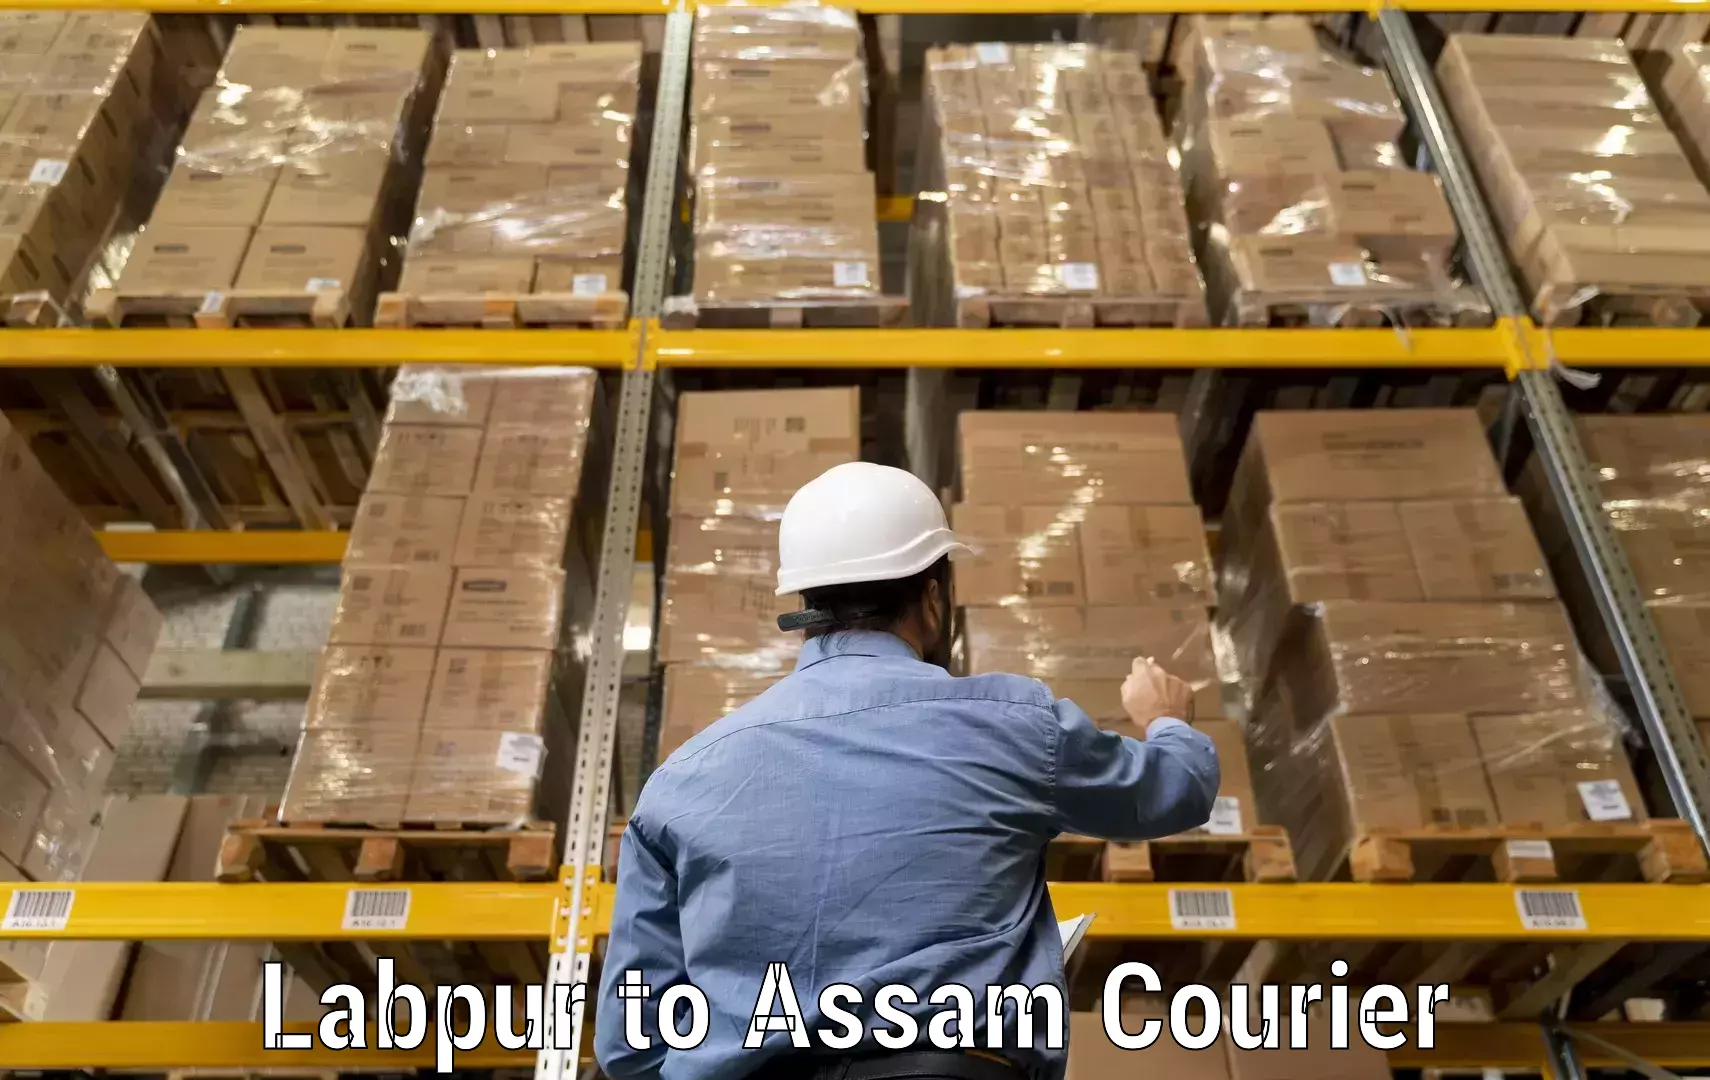 Secure shipping methods Labpur to Jorhat